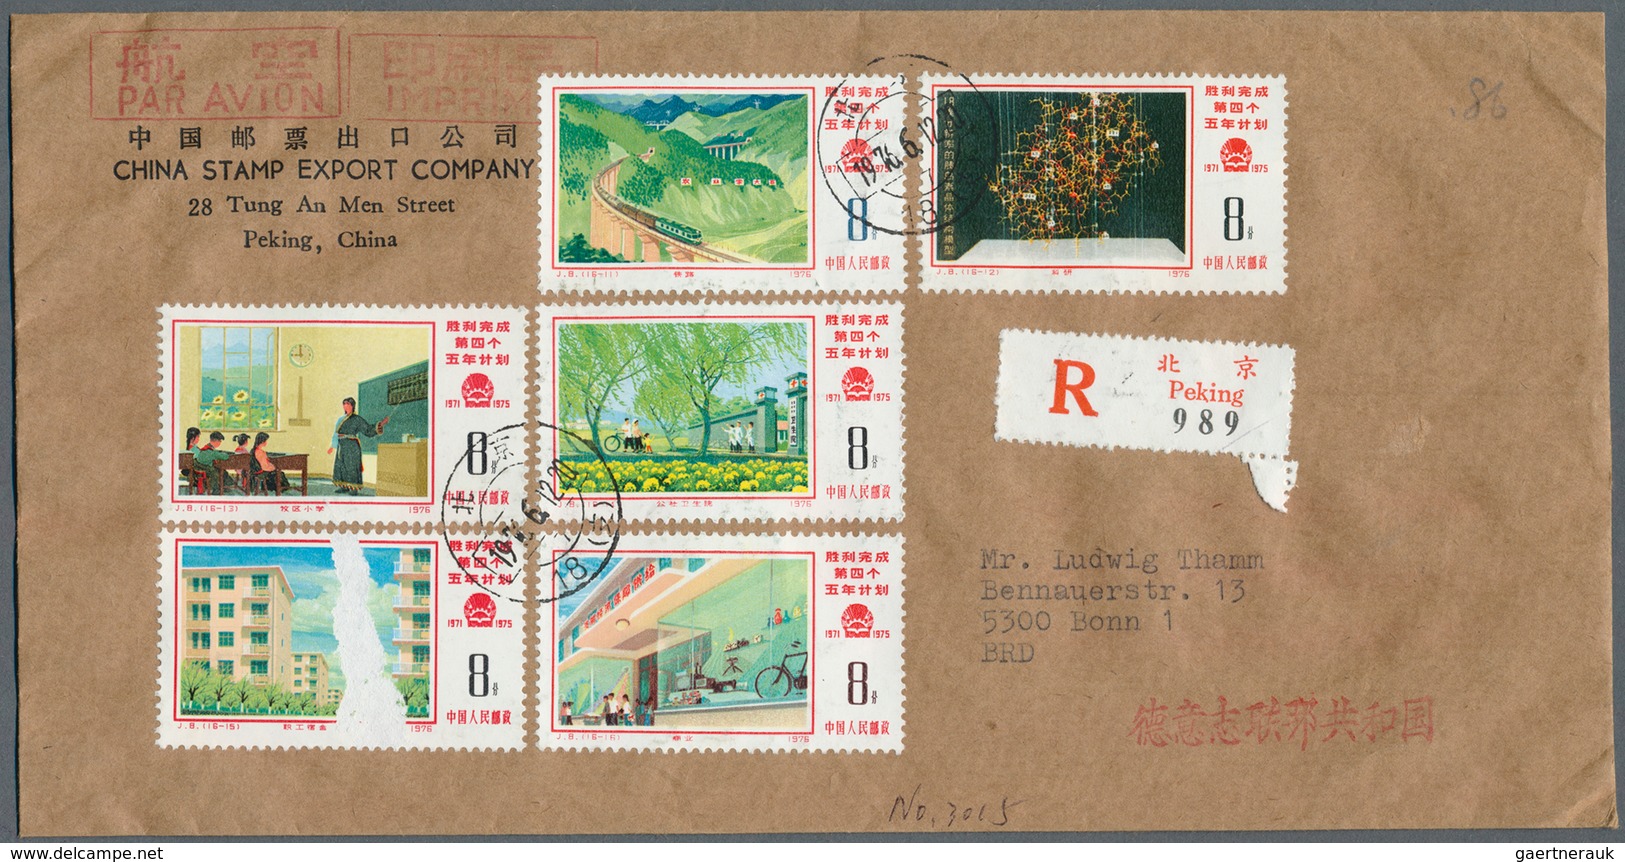 22443 China - Volksrepublik: 1954/77, covers (17), used ppc (10) mostly to West Germany, inc. many with co